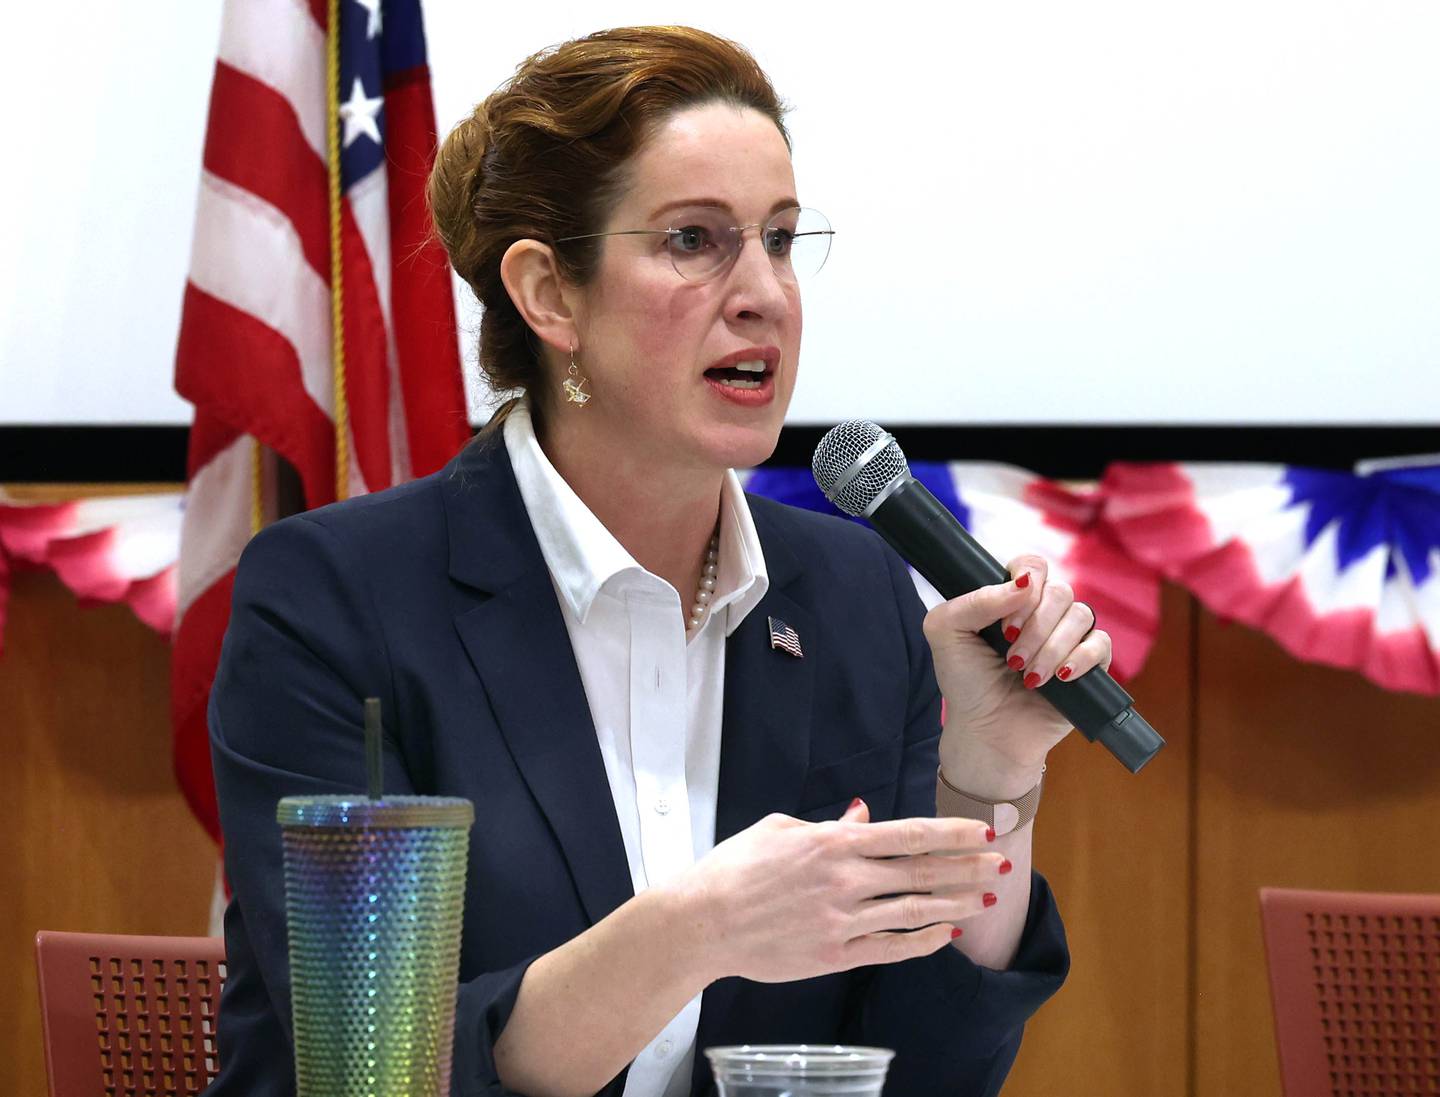 Democratic candidate Carolyn Zasada, who is vying for the nomination for the 76th district seat in the Illinois House of Representatives, answers a question Saturday, Feb. 3, 2024, in a meet the candidates forum at the DeKalb Public Library. Democratic candidates Amy Murri Briel and Cohen Barnes also spoke at the event organized by DeKalb Stands and co-sponsored by the DeKalb County Democrats.